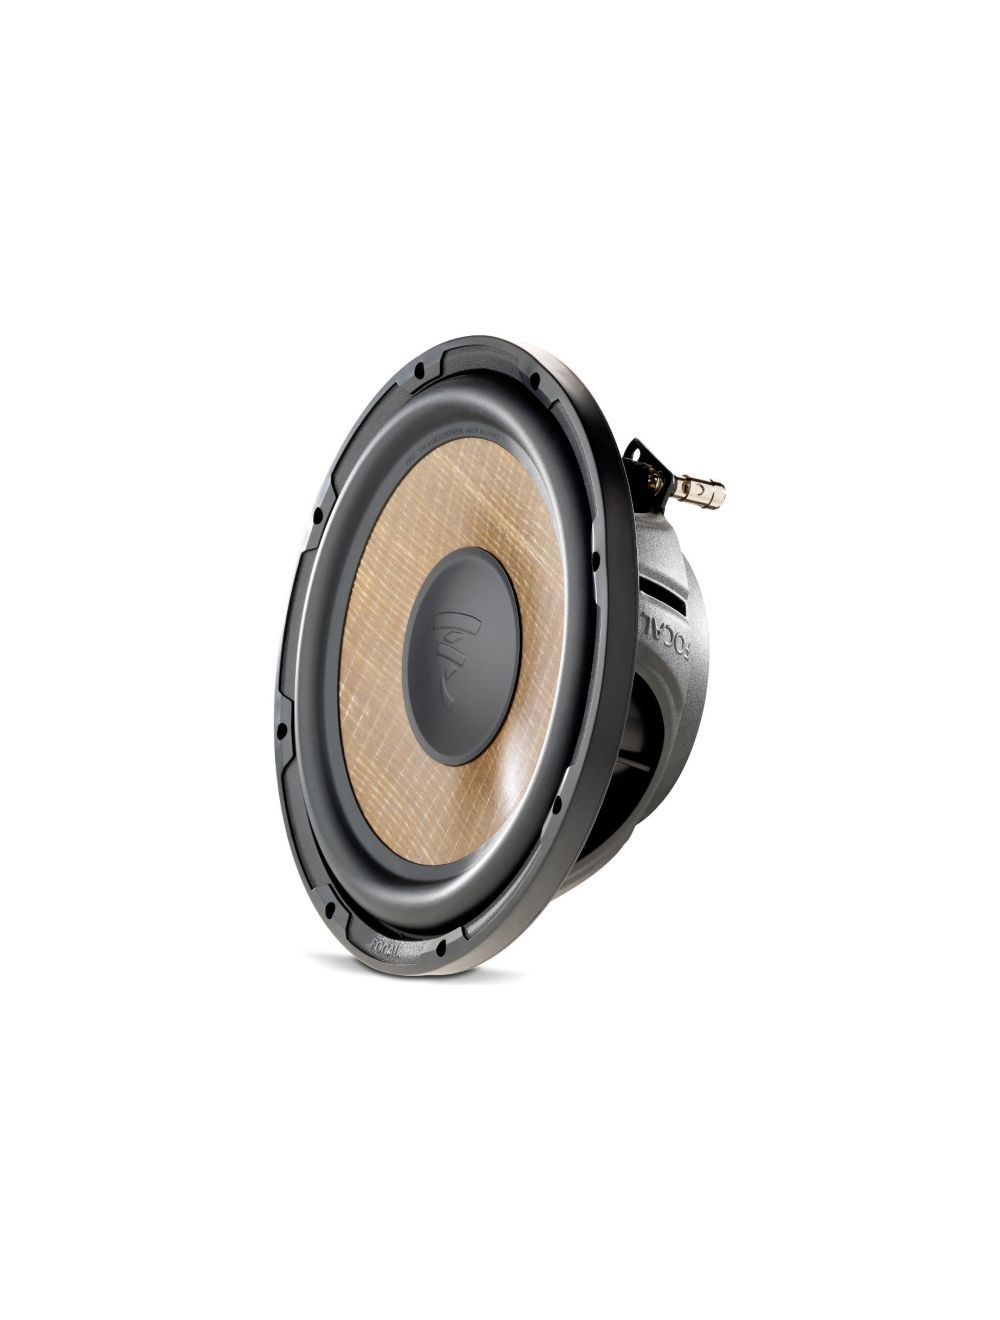 Focal SUB P 25FS 10 Flax Shallow Subwoofer 4 Ohms,RMS 280W-MAX 560W